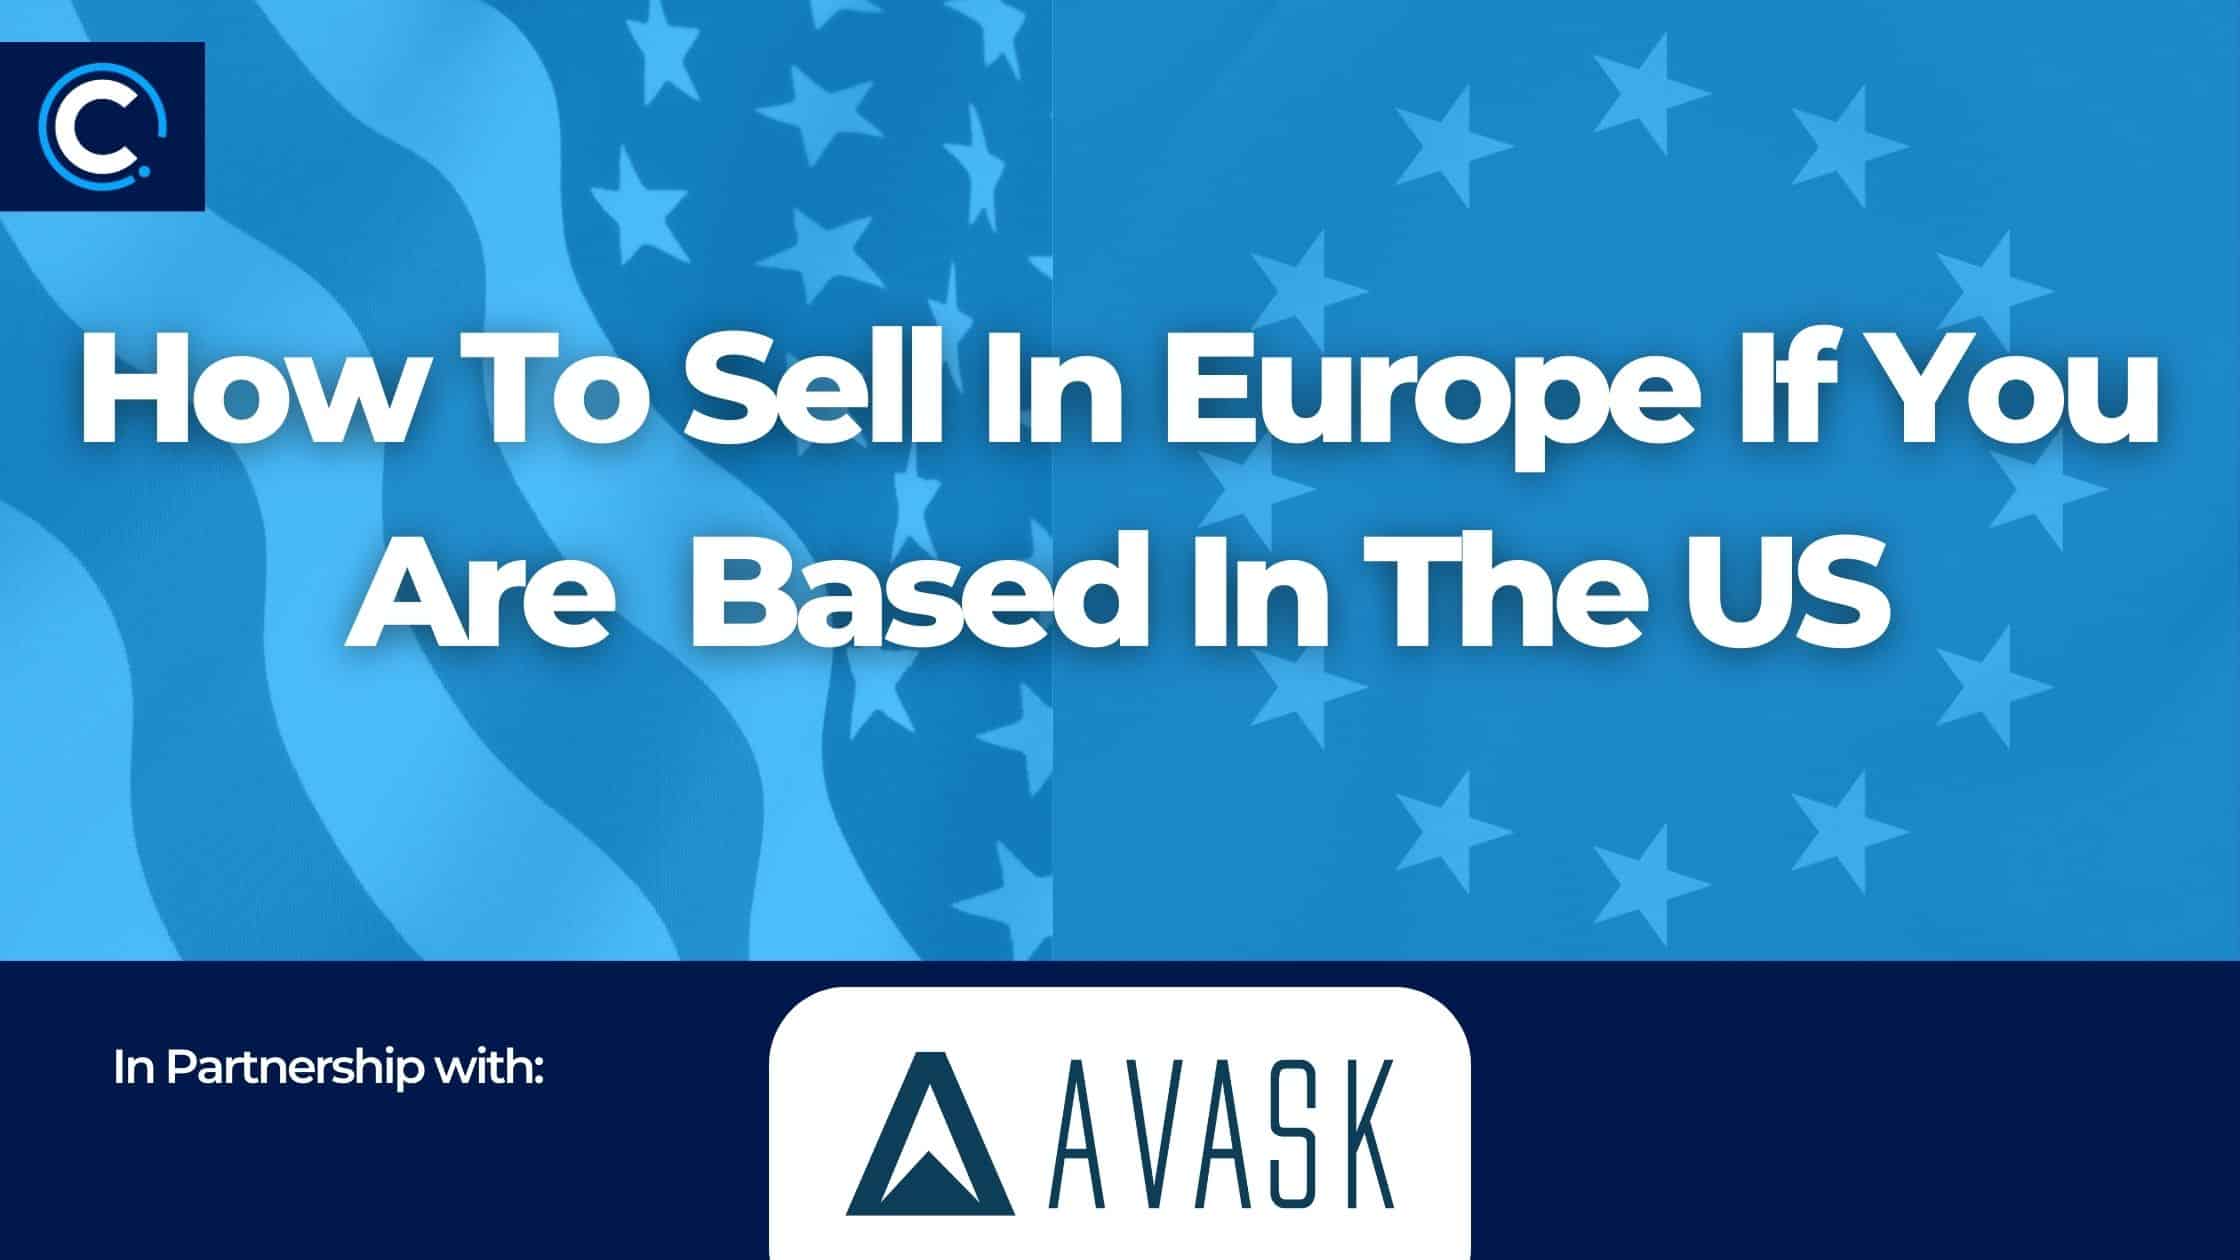 How to sell in europe if you are based in the us